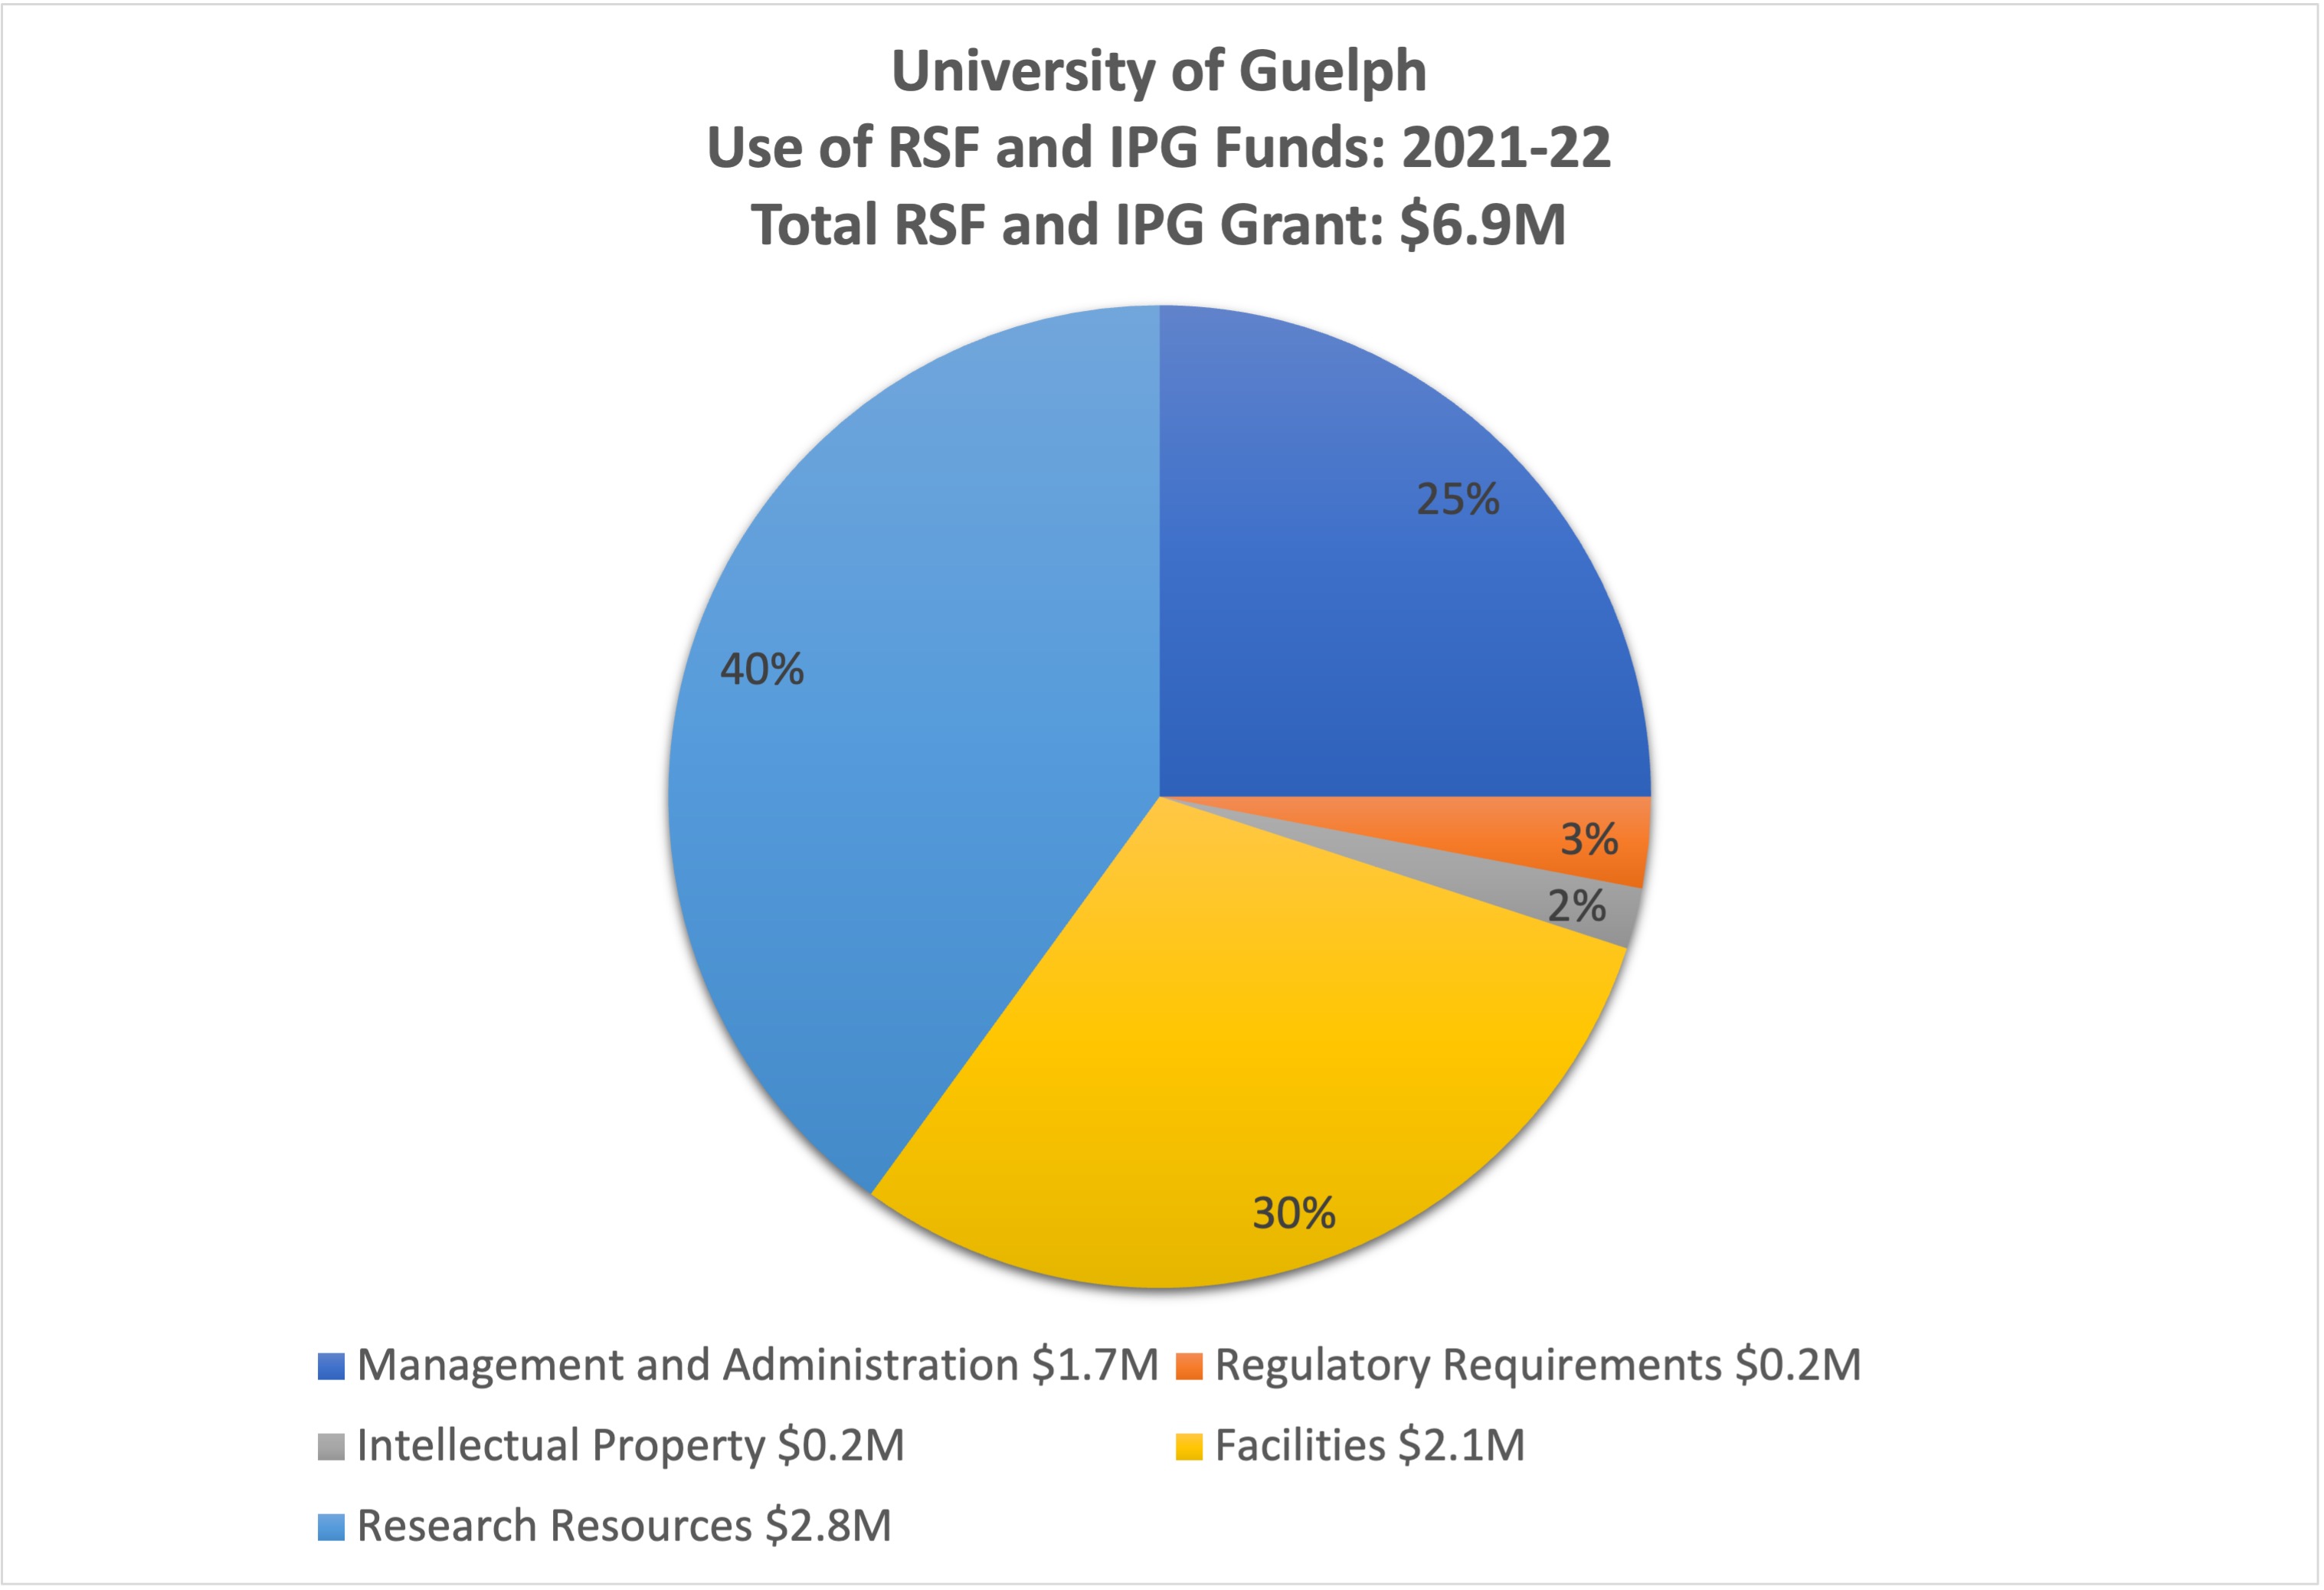 University of Guelph - Use of RSF and IPG Funds: 2021-22 - Total RSF and IPG Grant: $6.9M. Management and Administration - $1.7M. Regulatory Requirements - $0.2M. Intellectual Property - $0.2M. Facilities - $2.1M. Research Resources $2.8M.